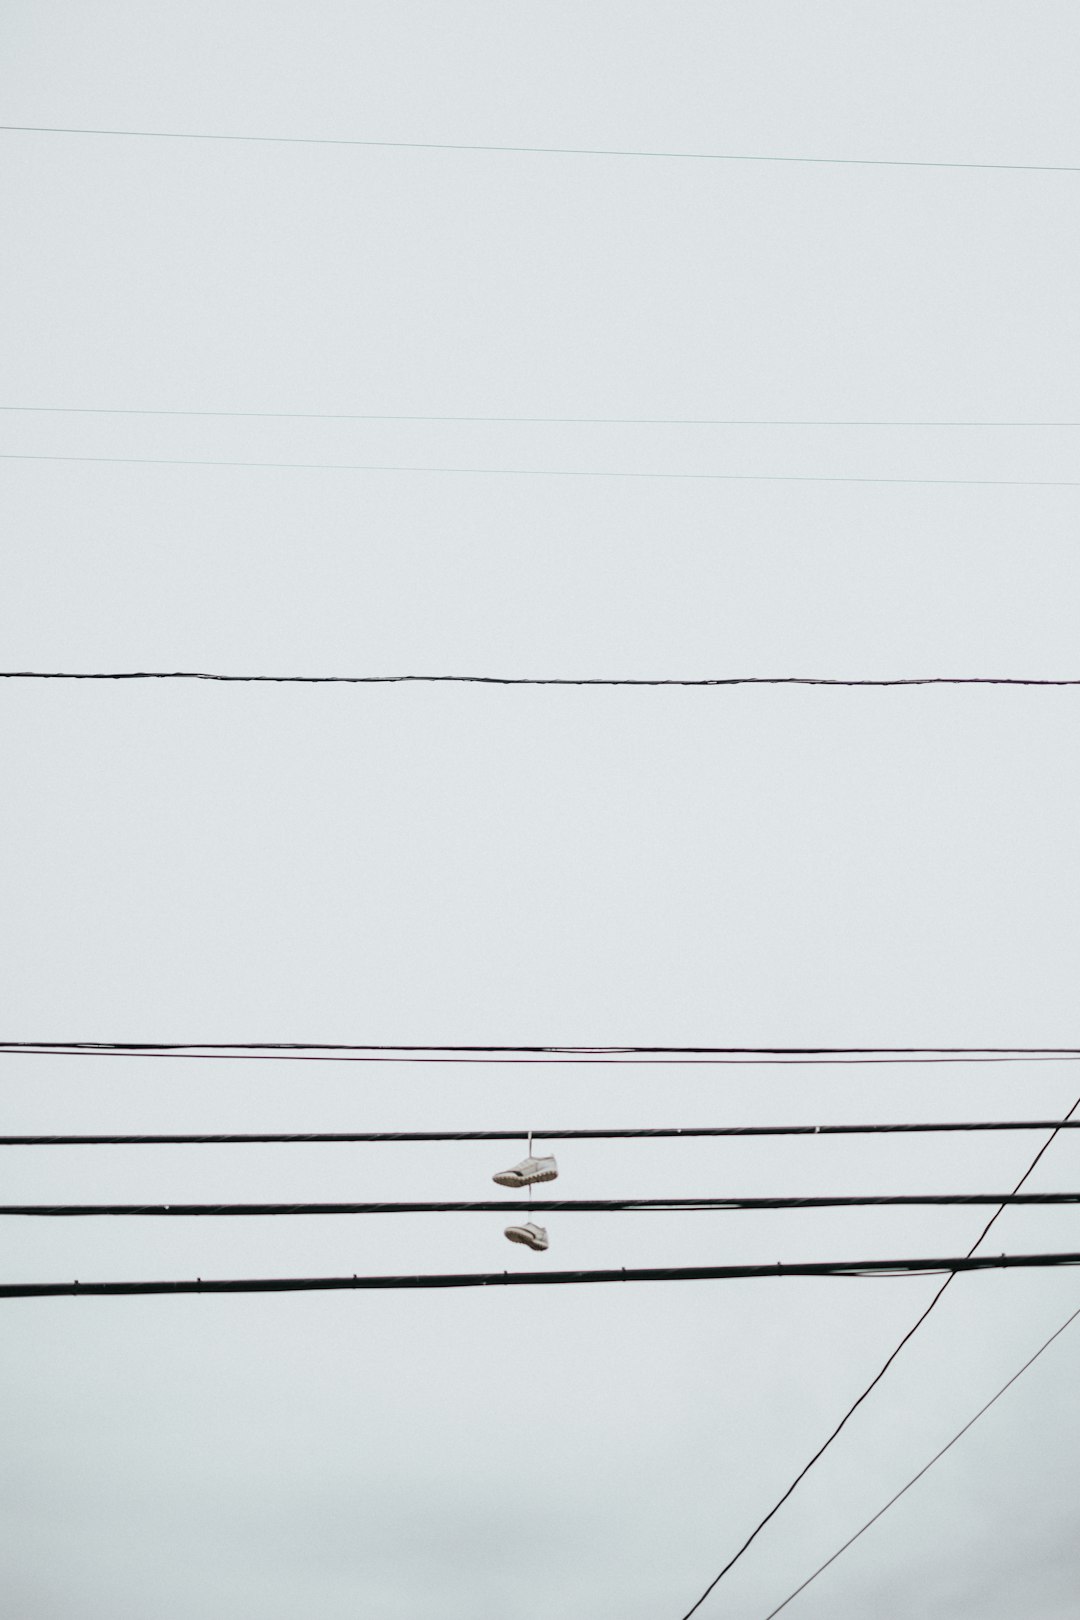 shoes hanging on utility cable